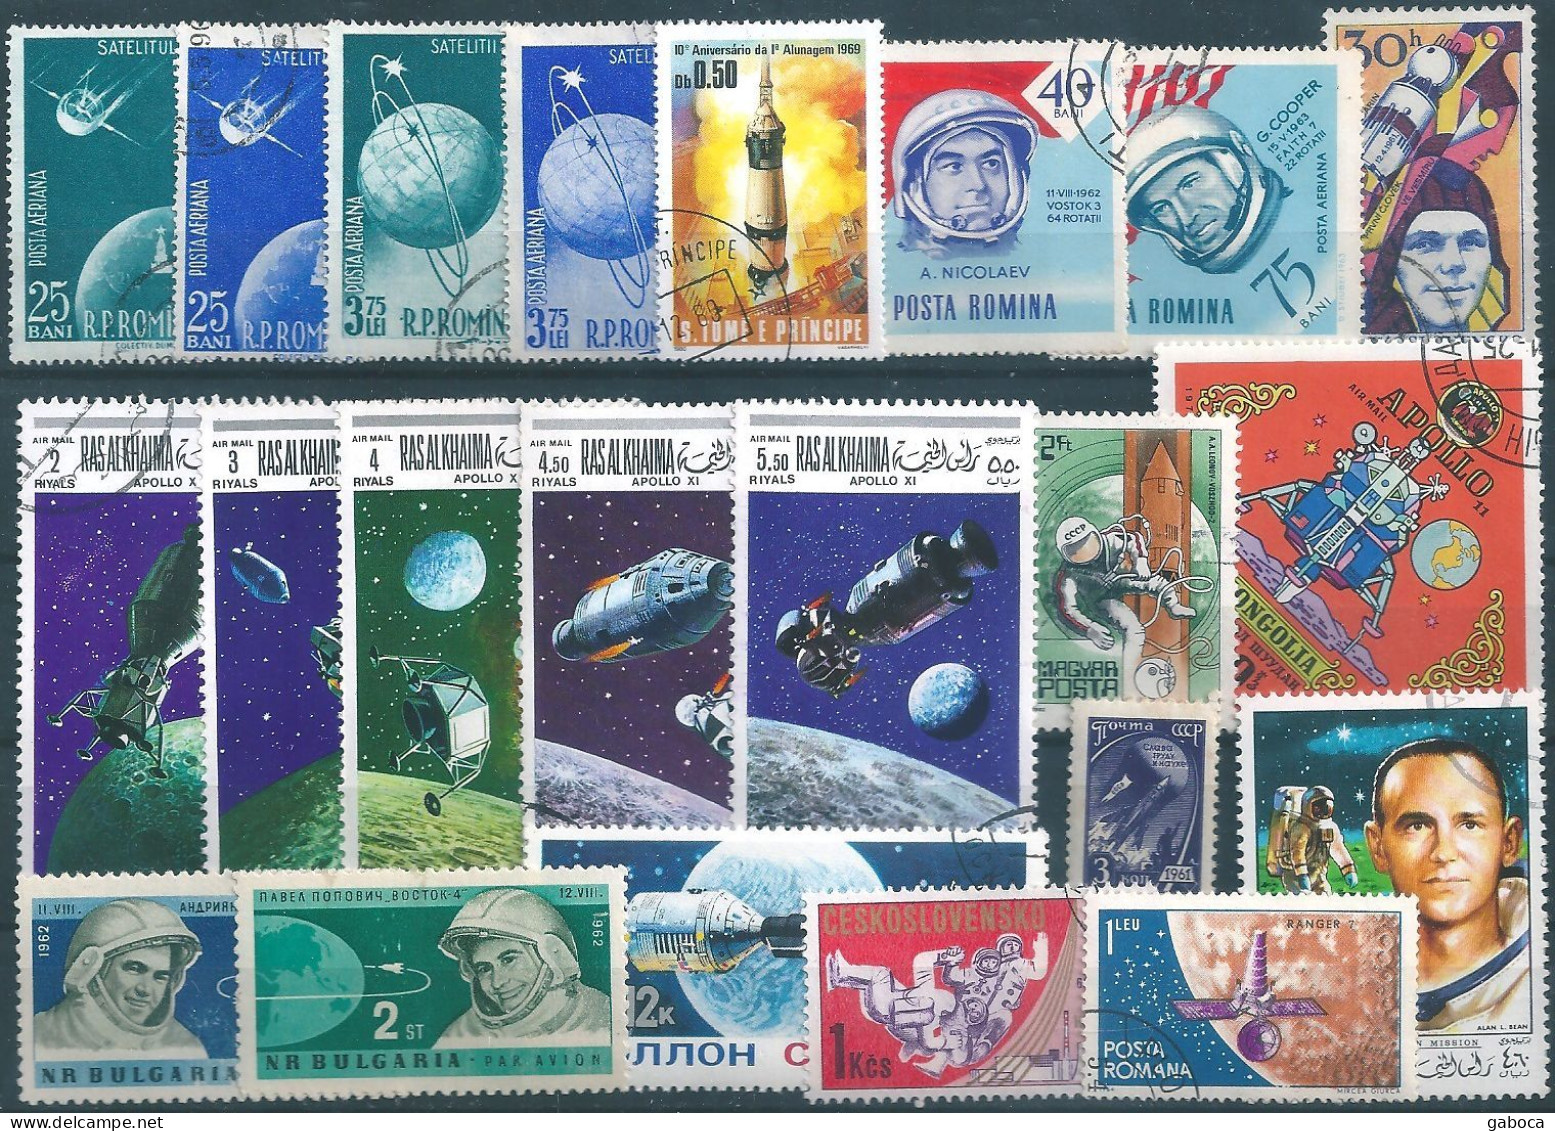 C4746 Space Spacetravel Satellite Astronaut Planet Flag 1xSet+18xStamp Used  Lot#574 - Collections